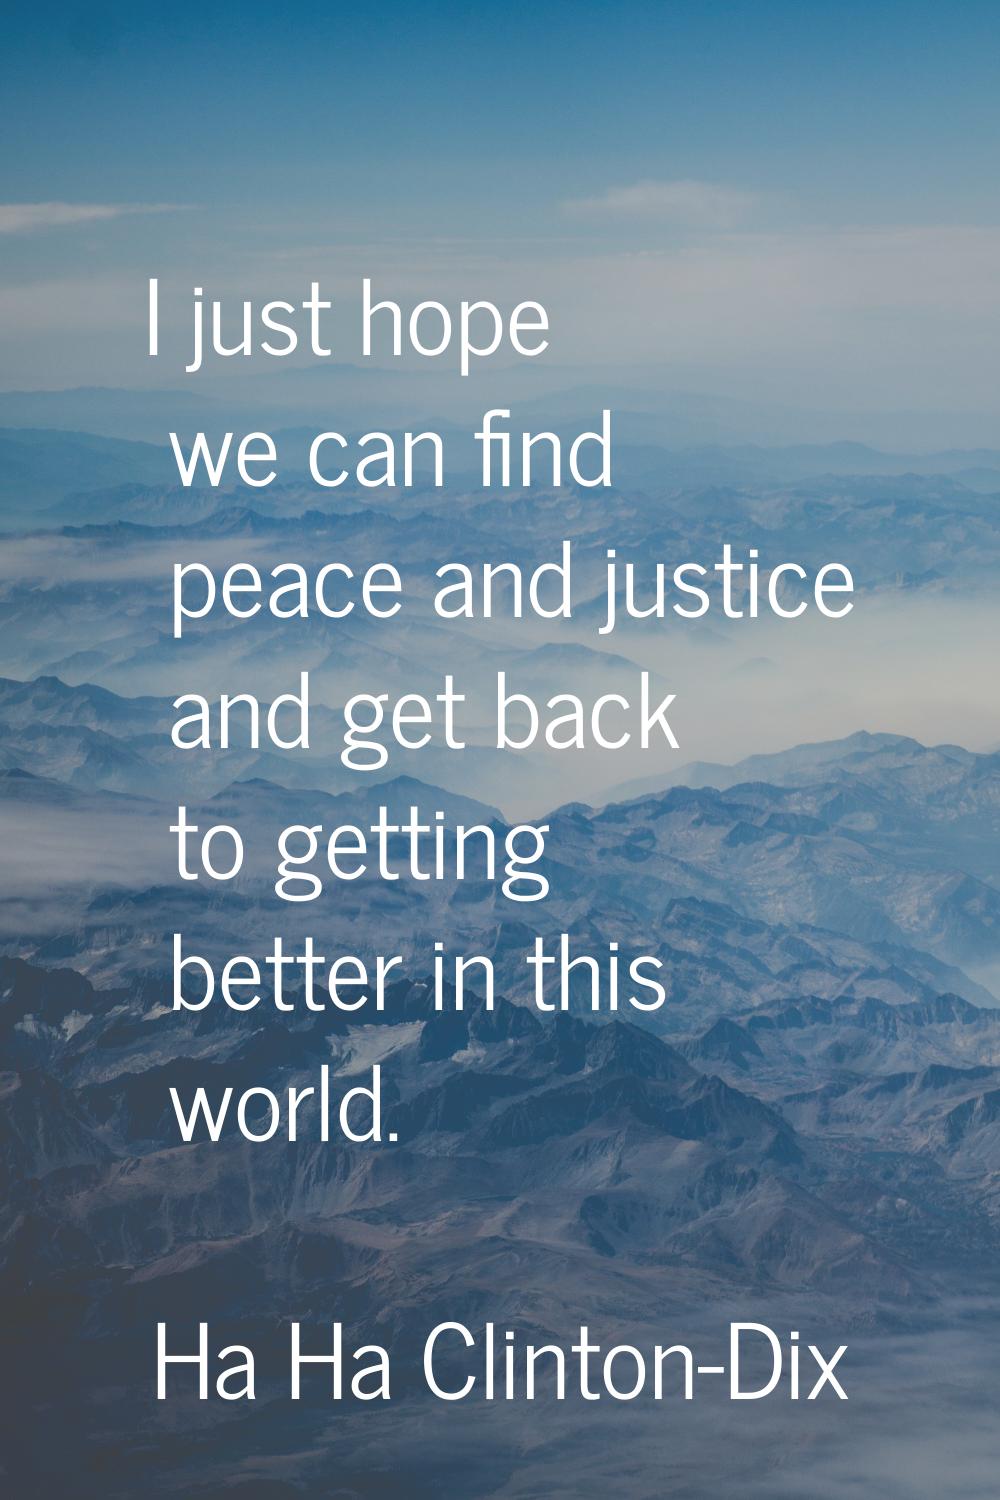 I just hope we can find peace and justice and get back to getting better in this world.